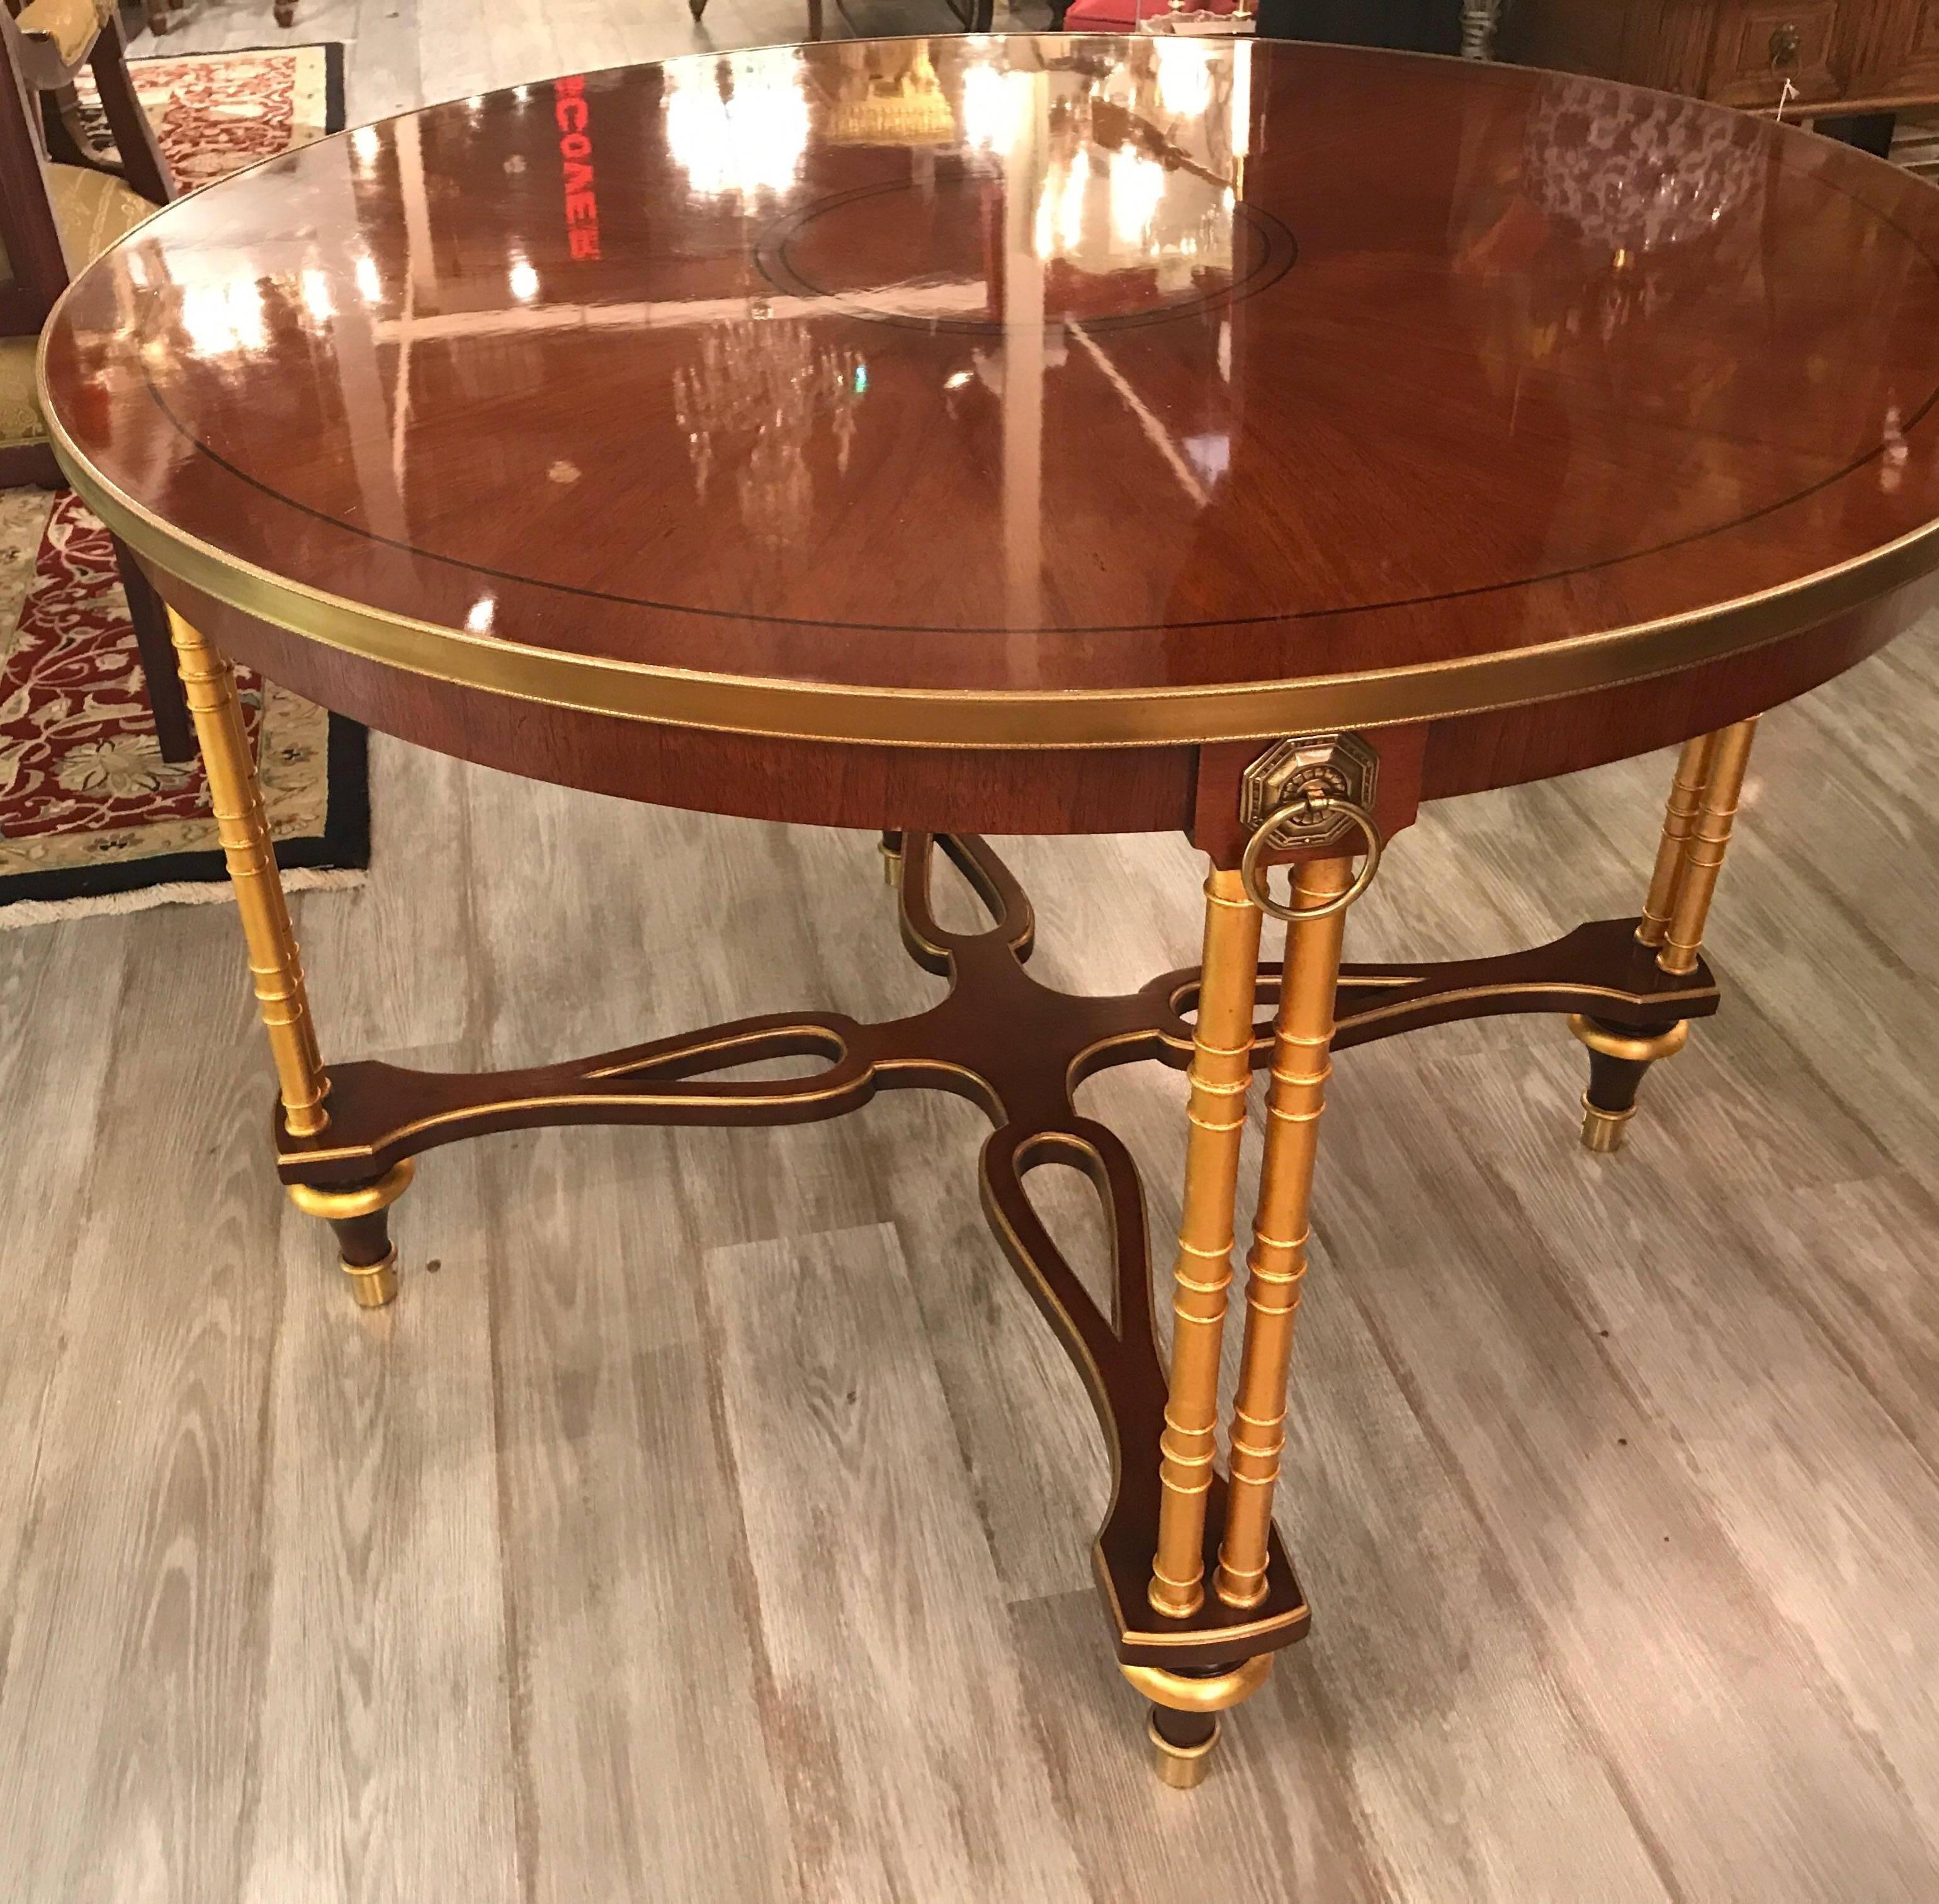 20th Century Mahogany Regency Style Centre Table by Baker Furniture